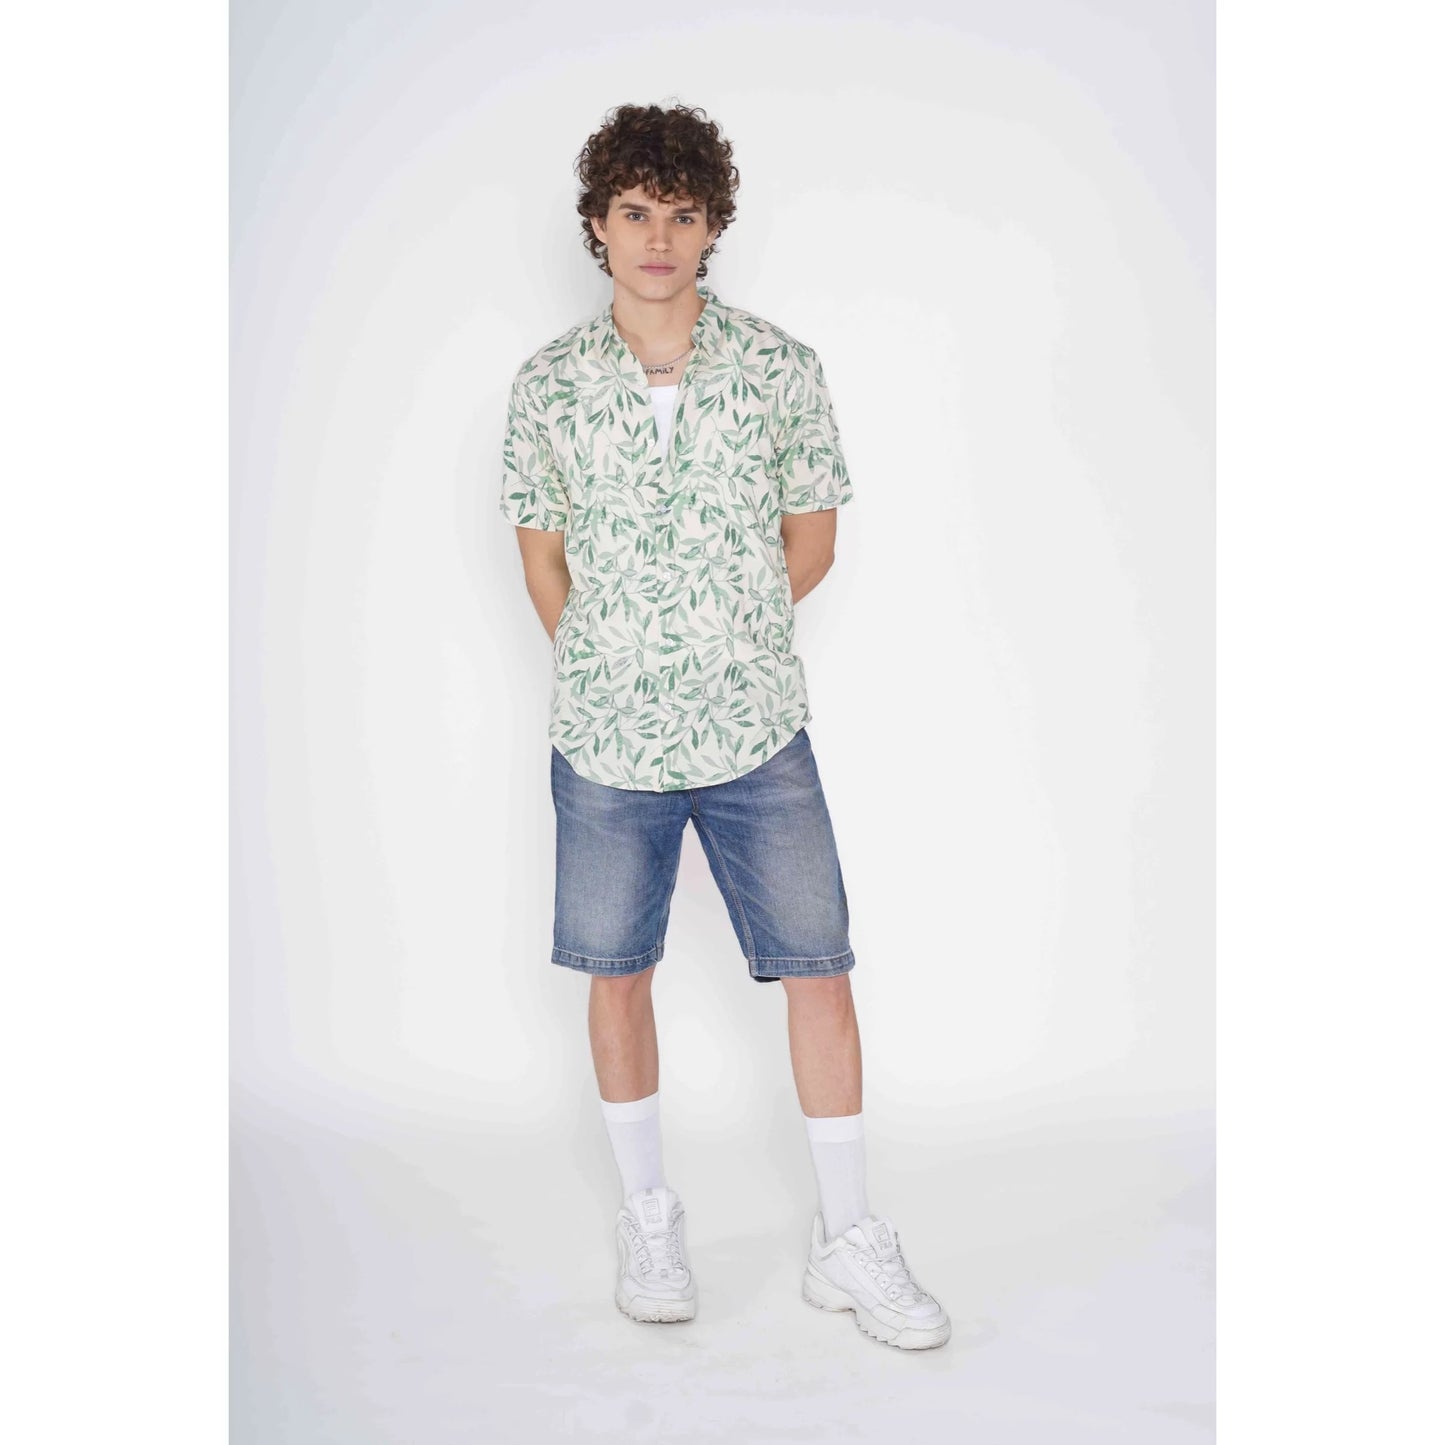 High by the beach - off white and light green printed shirt